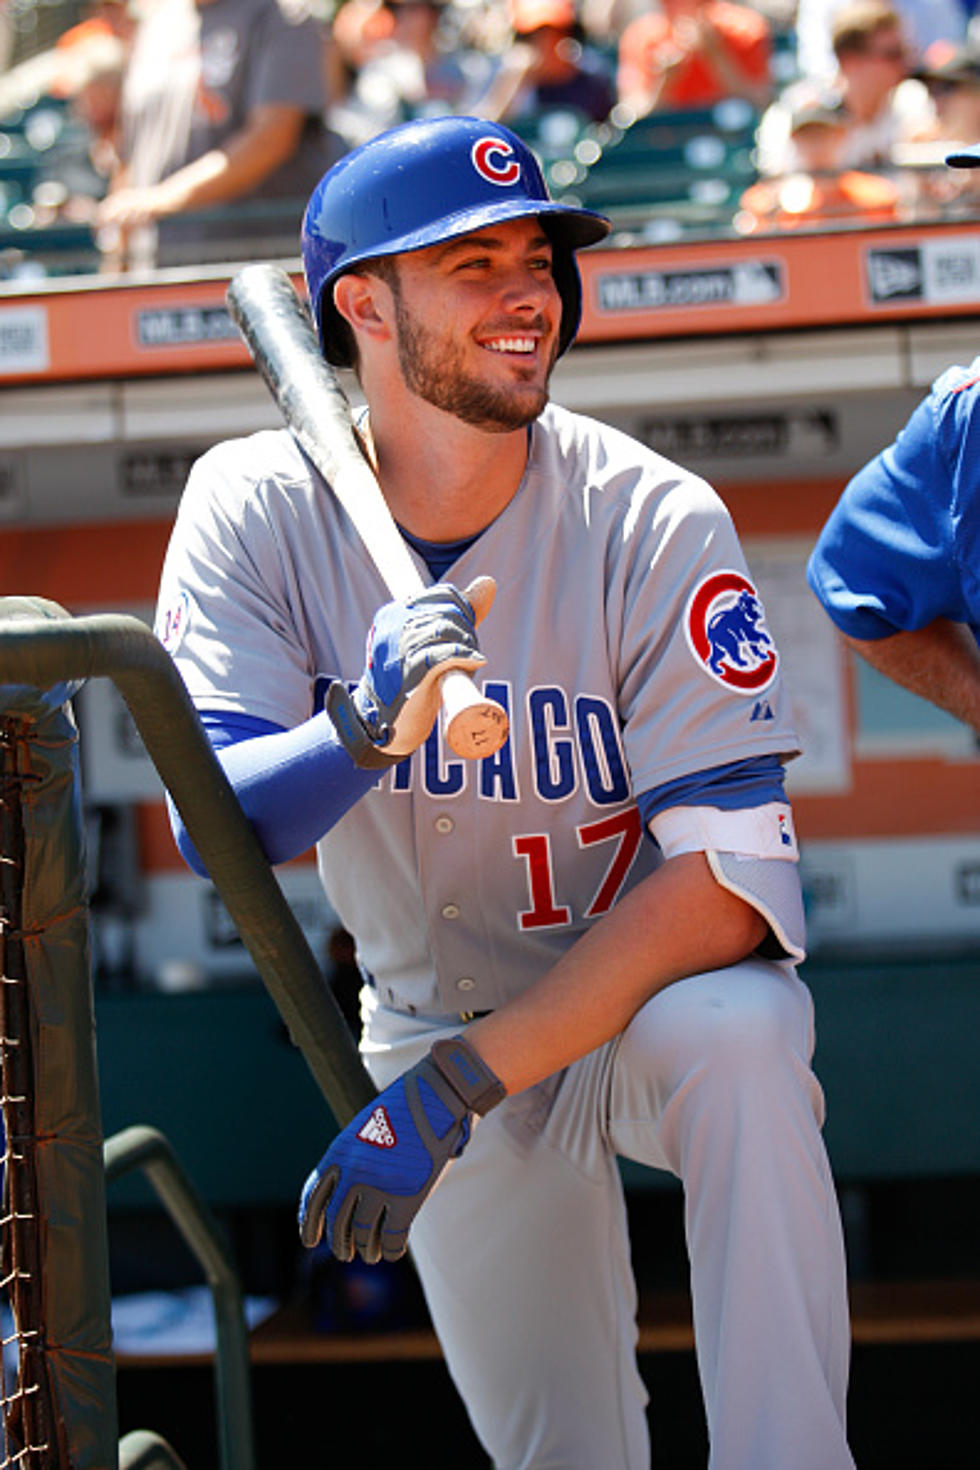 Check out these adorable photos from Kris Bryant's Las Vegas